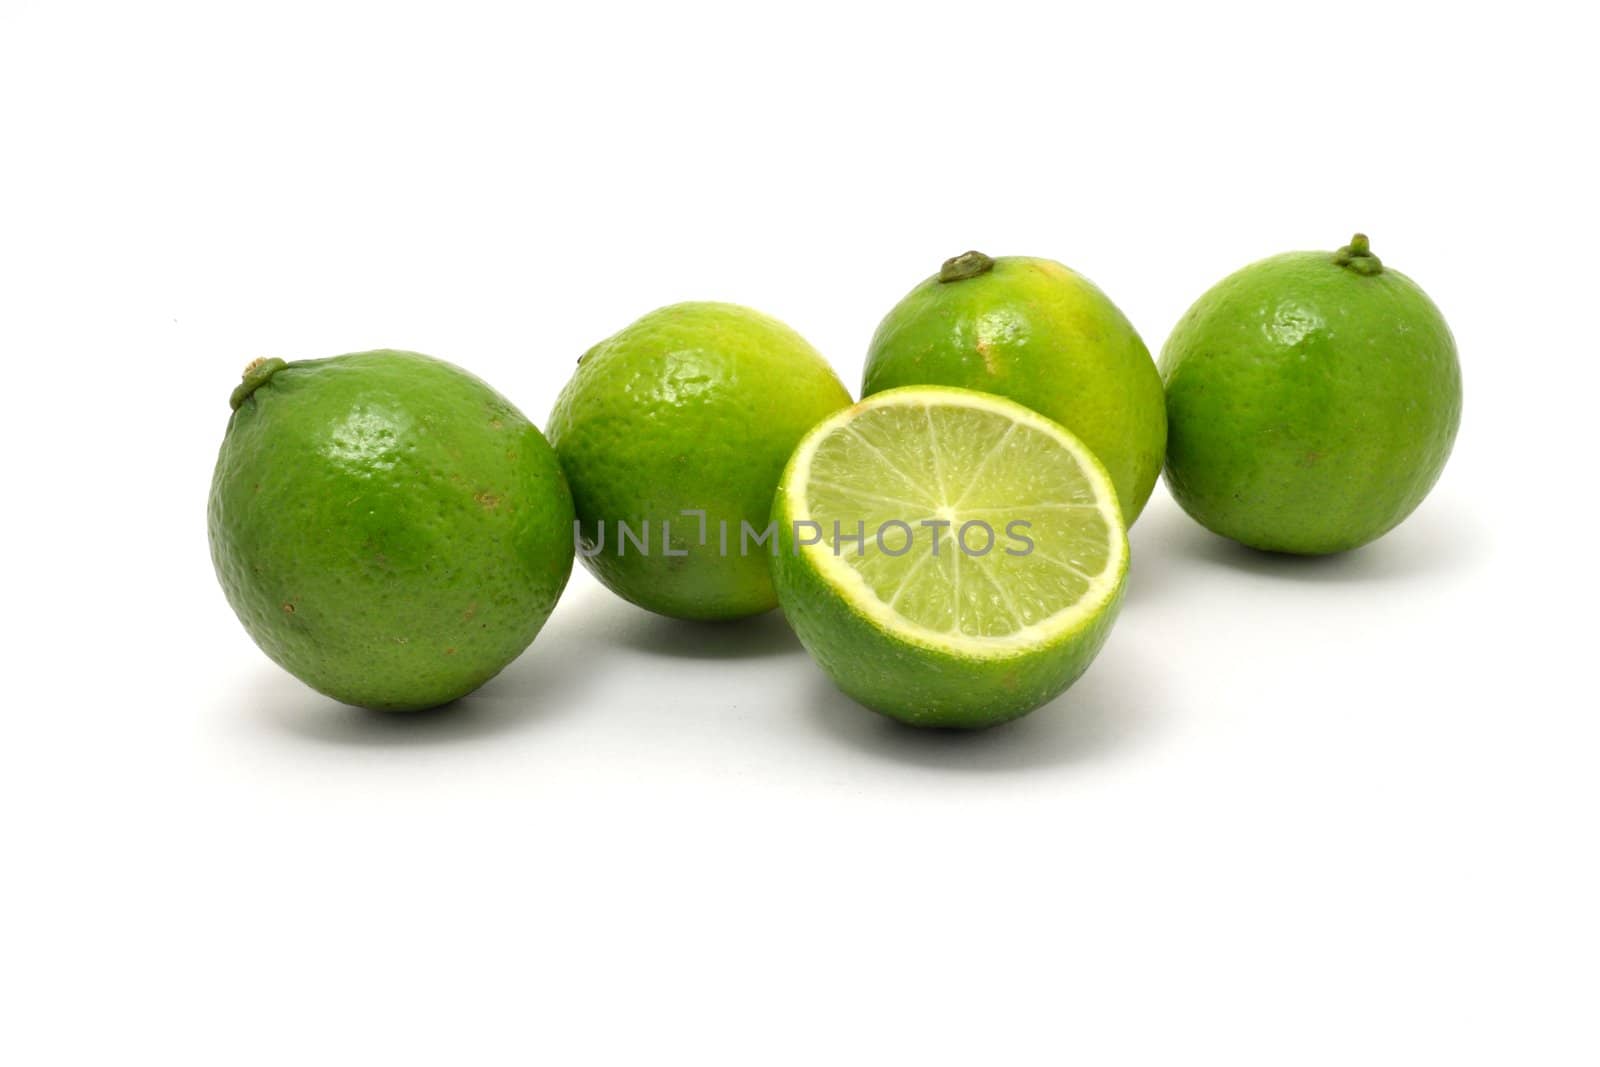 The fresh limes by Autre